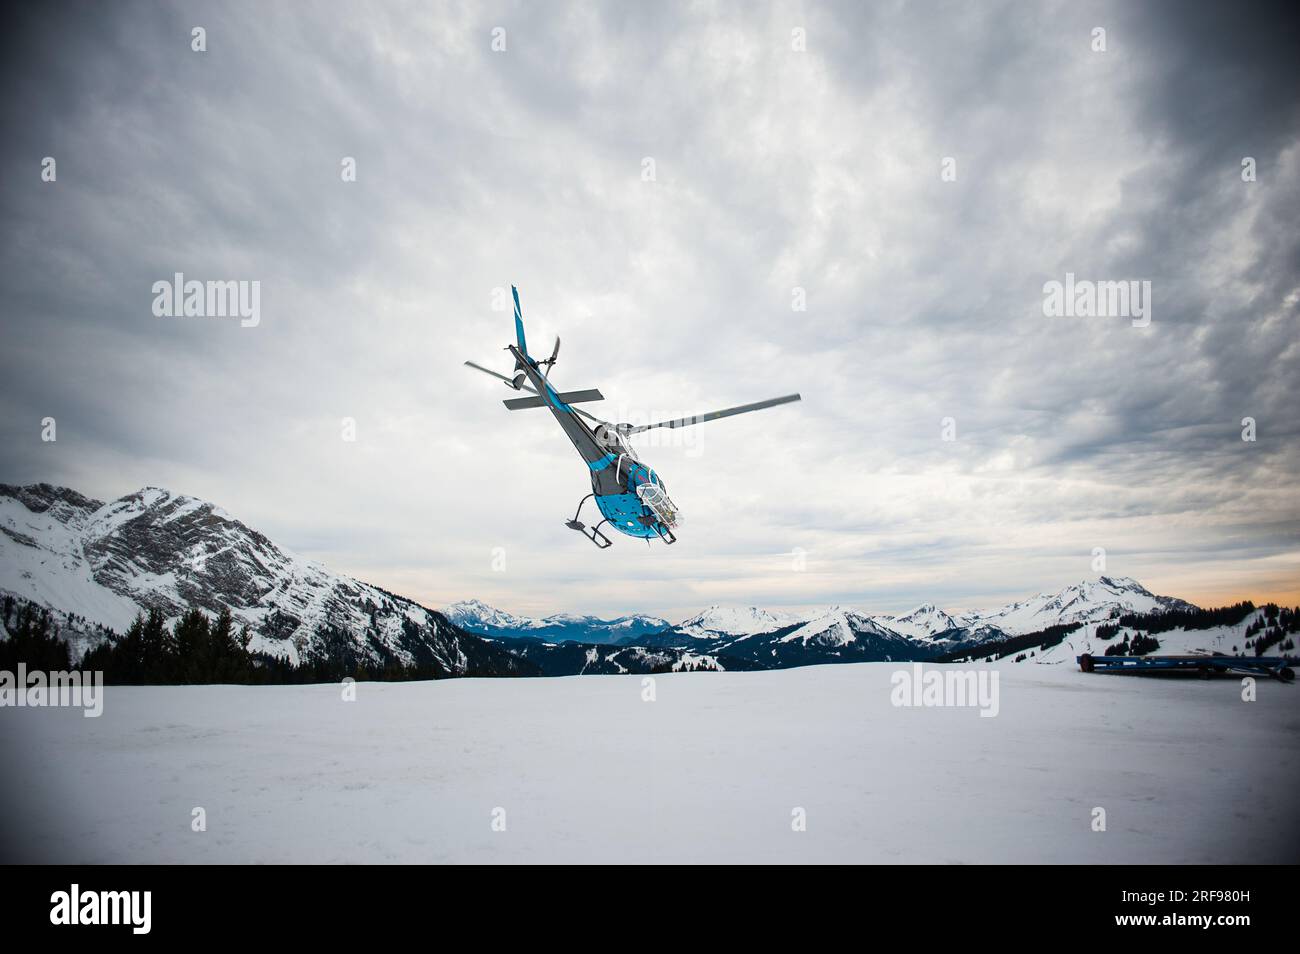 The trackers ensure the safety of the slopes for the skiers, a helicopter evacuates an injured person. Stock Photo